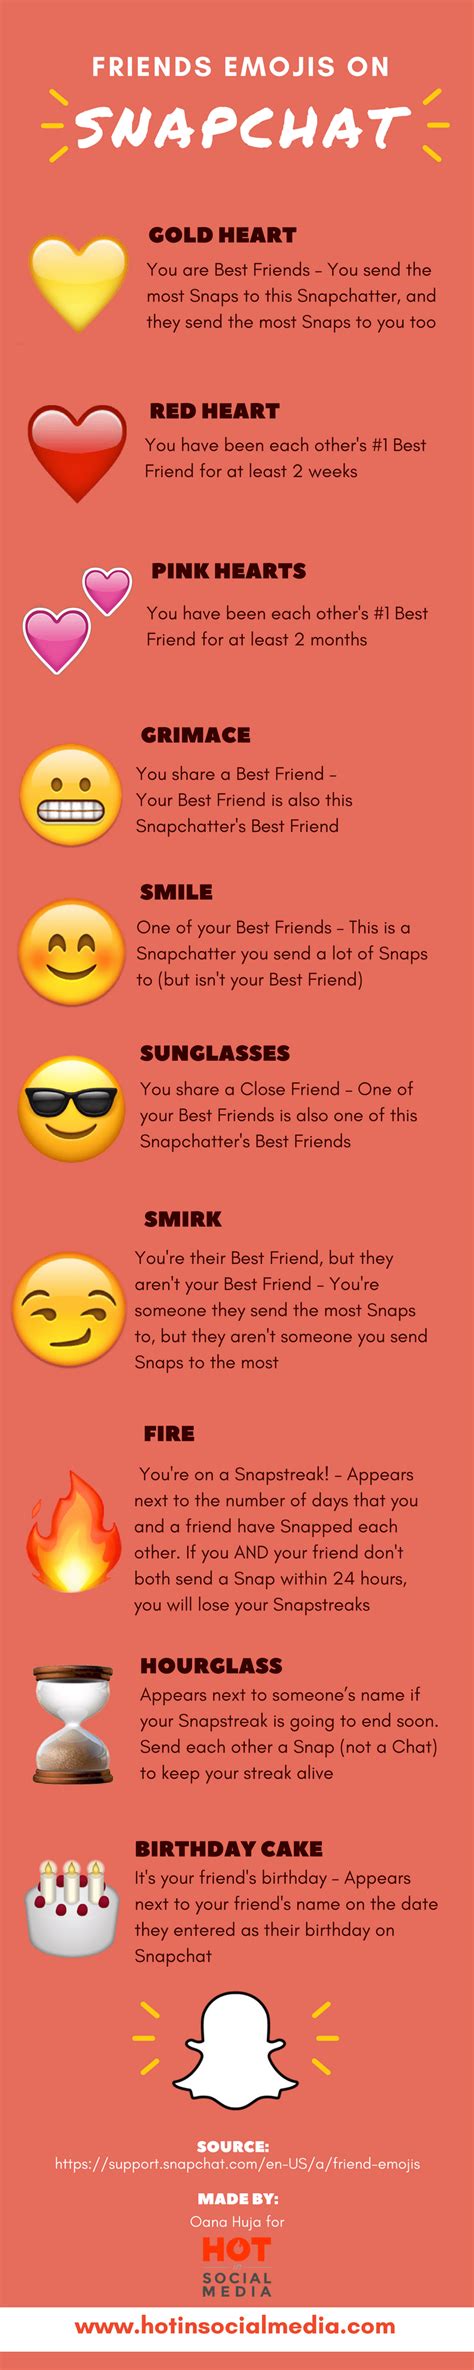 How To Change The Streaks Emoji On Snap